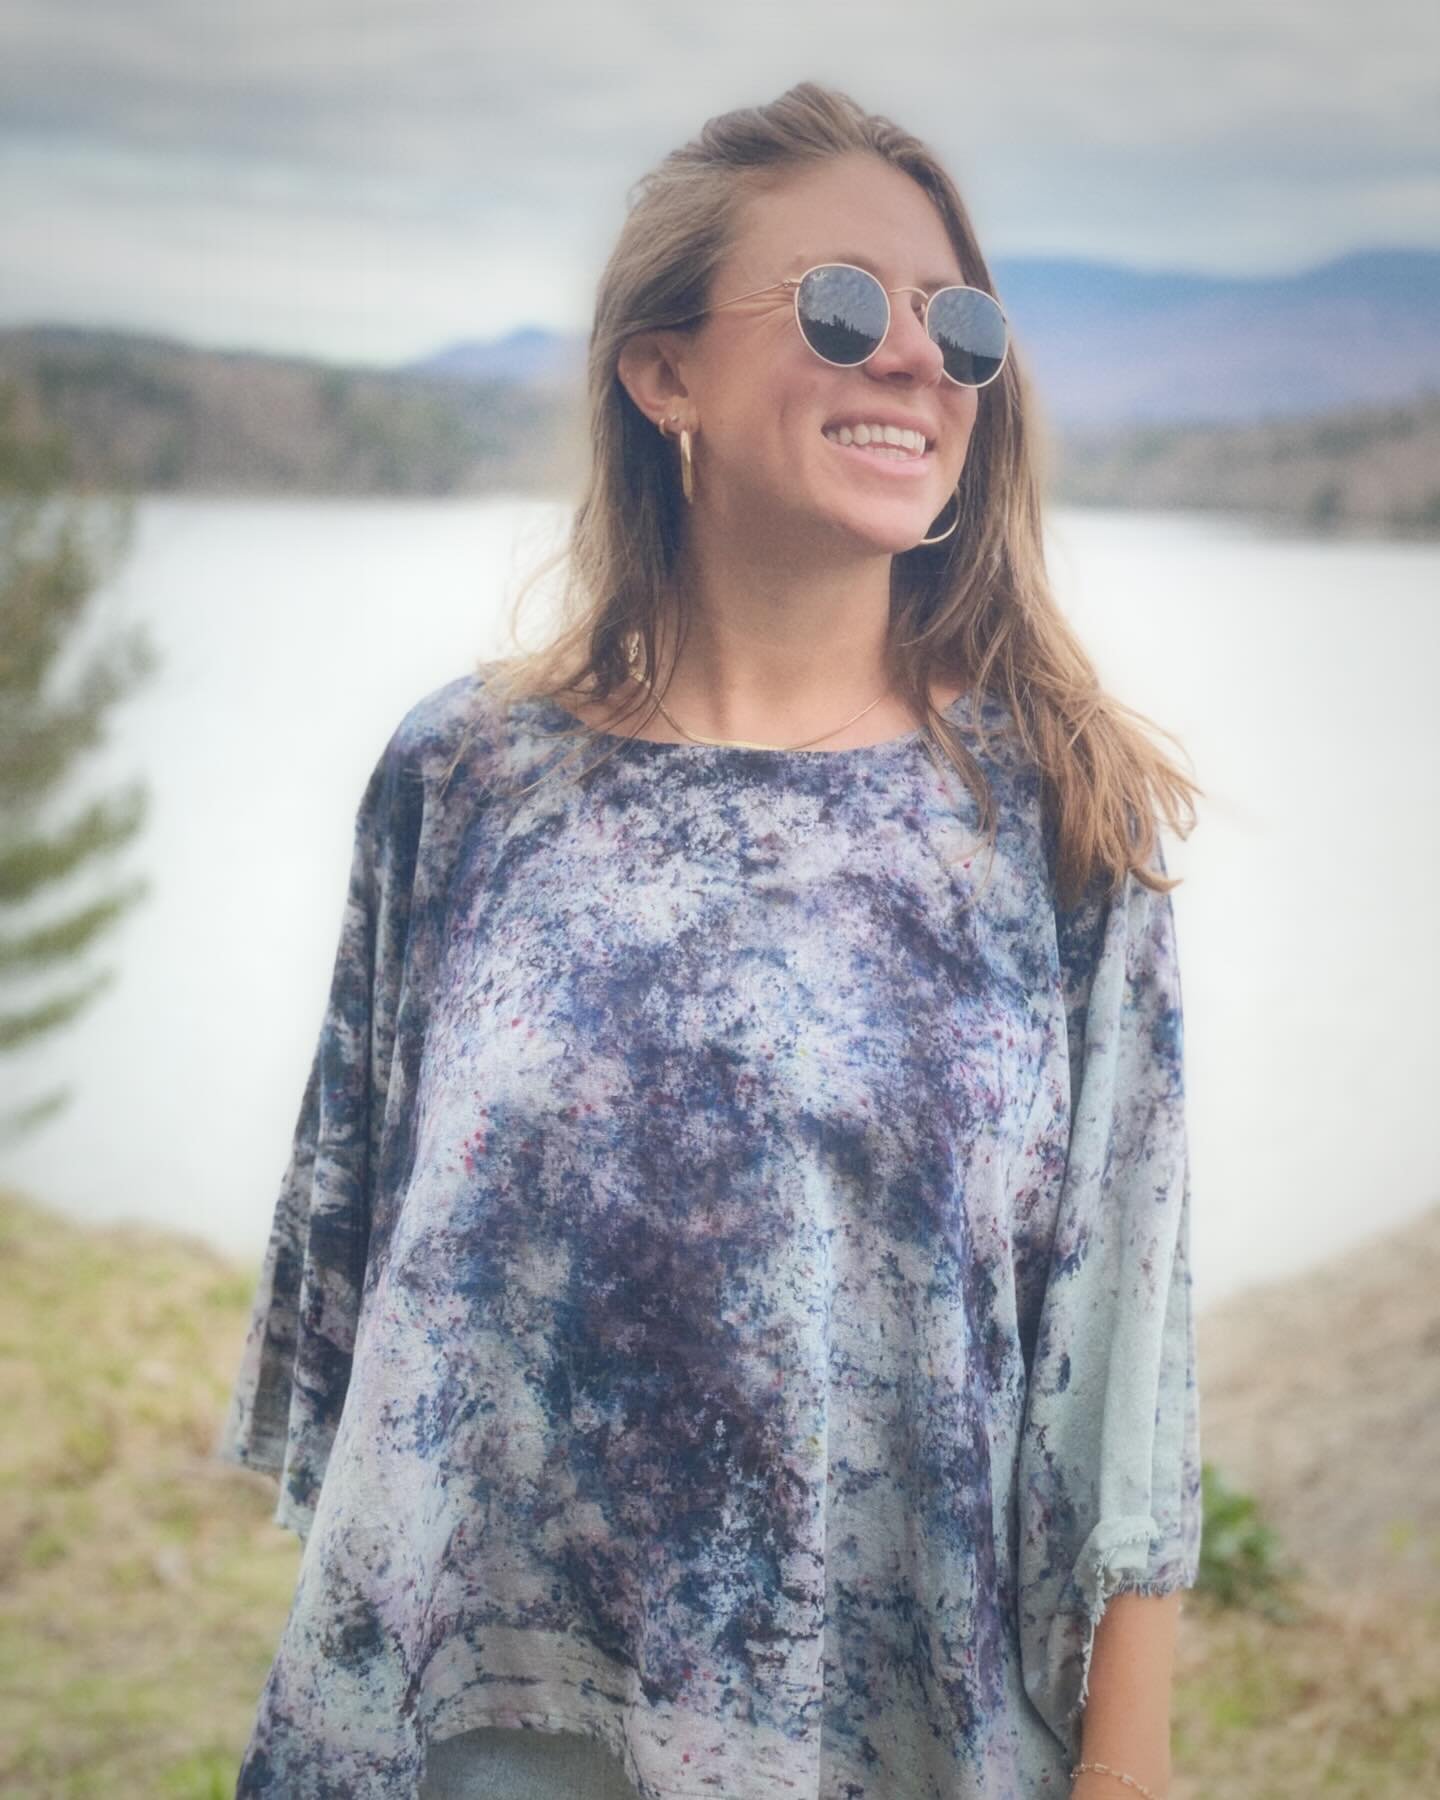 Introducing the reservoir collection&hellip; made from yummy raw silk, a nubby and natural textured silk that is very soft + easy to wear. Inspired by the colors of the Waterbury Reservoir, one of my favorite places to explore. Now available online a